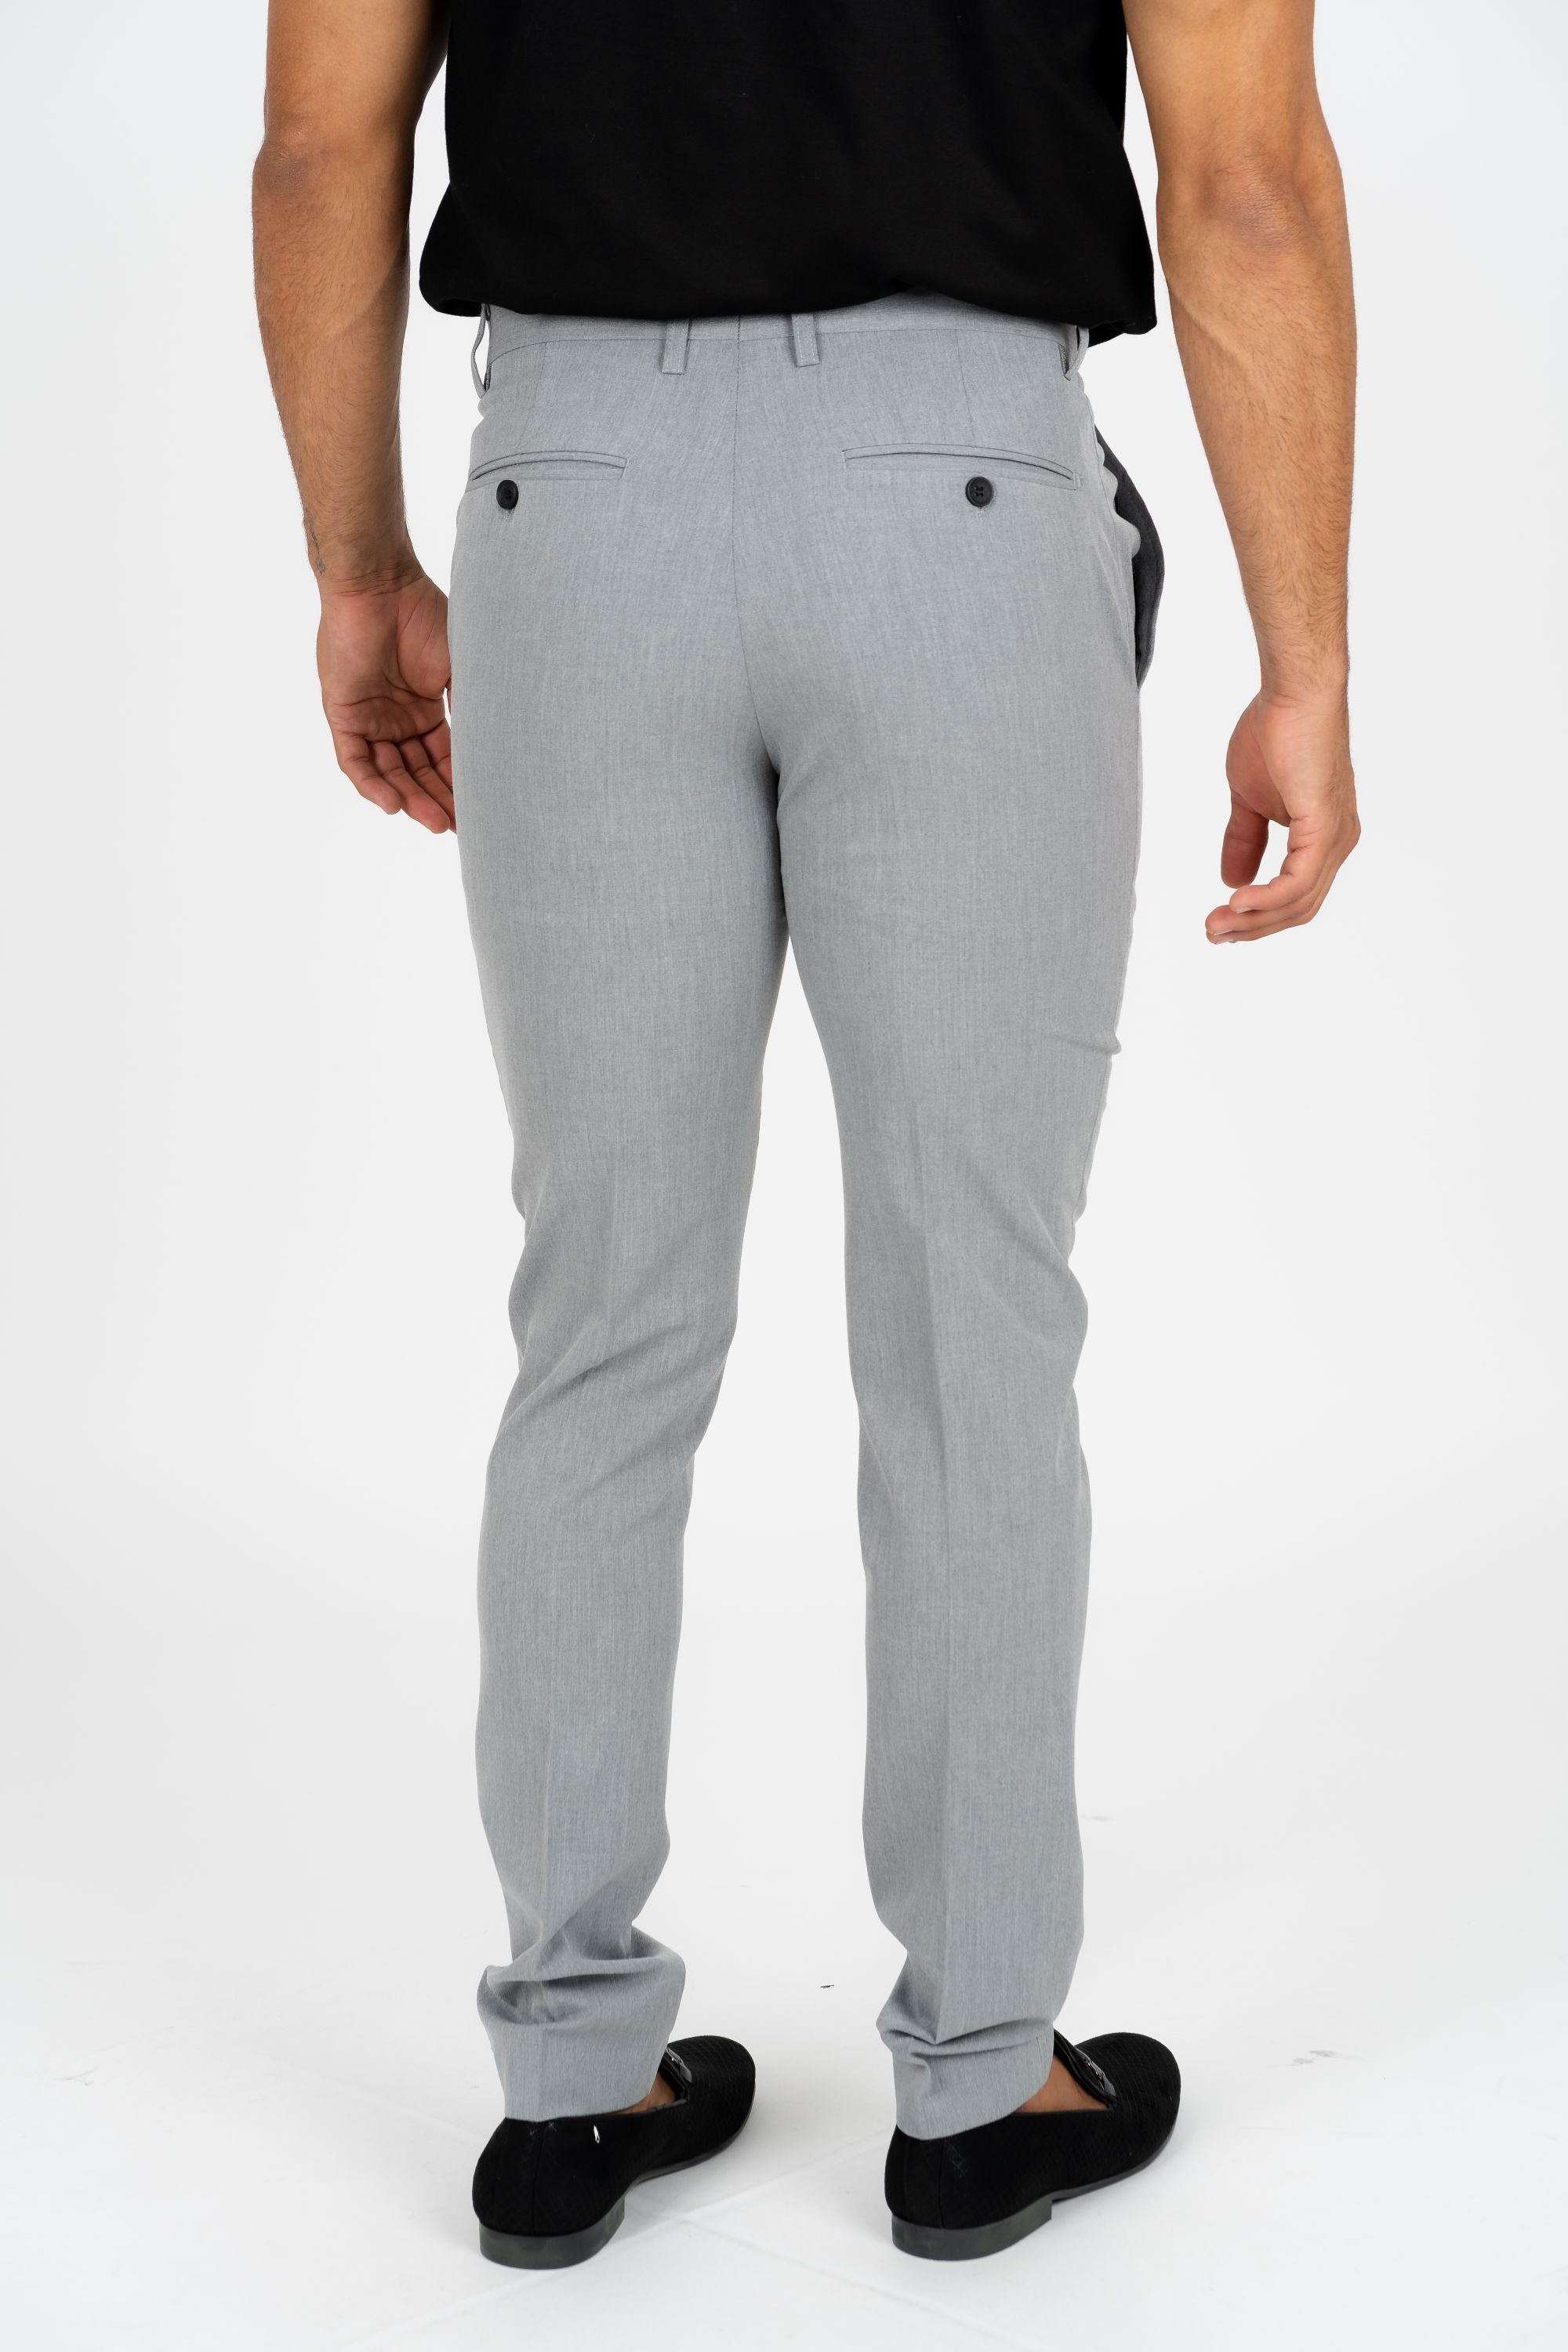 Buy Light Gray Side Pocket Straight Cargo Pants Cotton for Best Price,  Reviews, Free Shipping